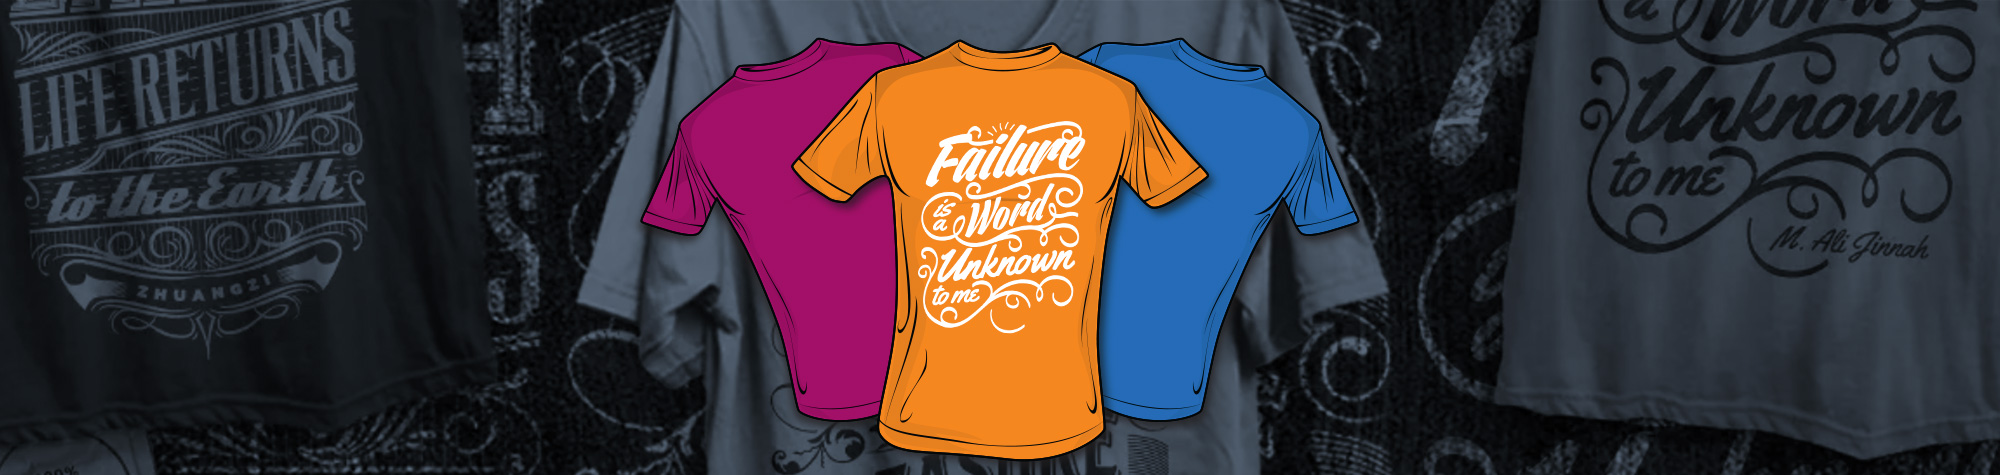 Graphic T-Shirt Design with Adobe Illustrator and Photoshop for DTG Printing